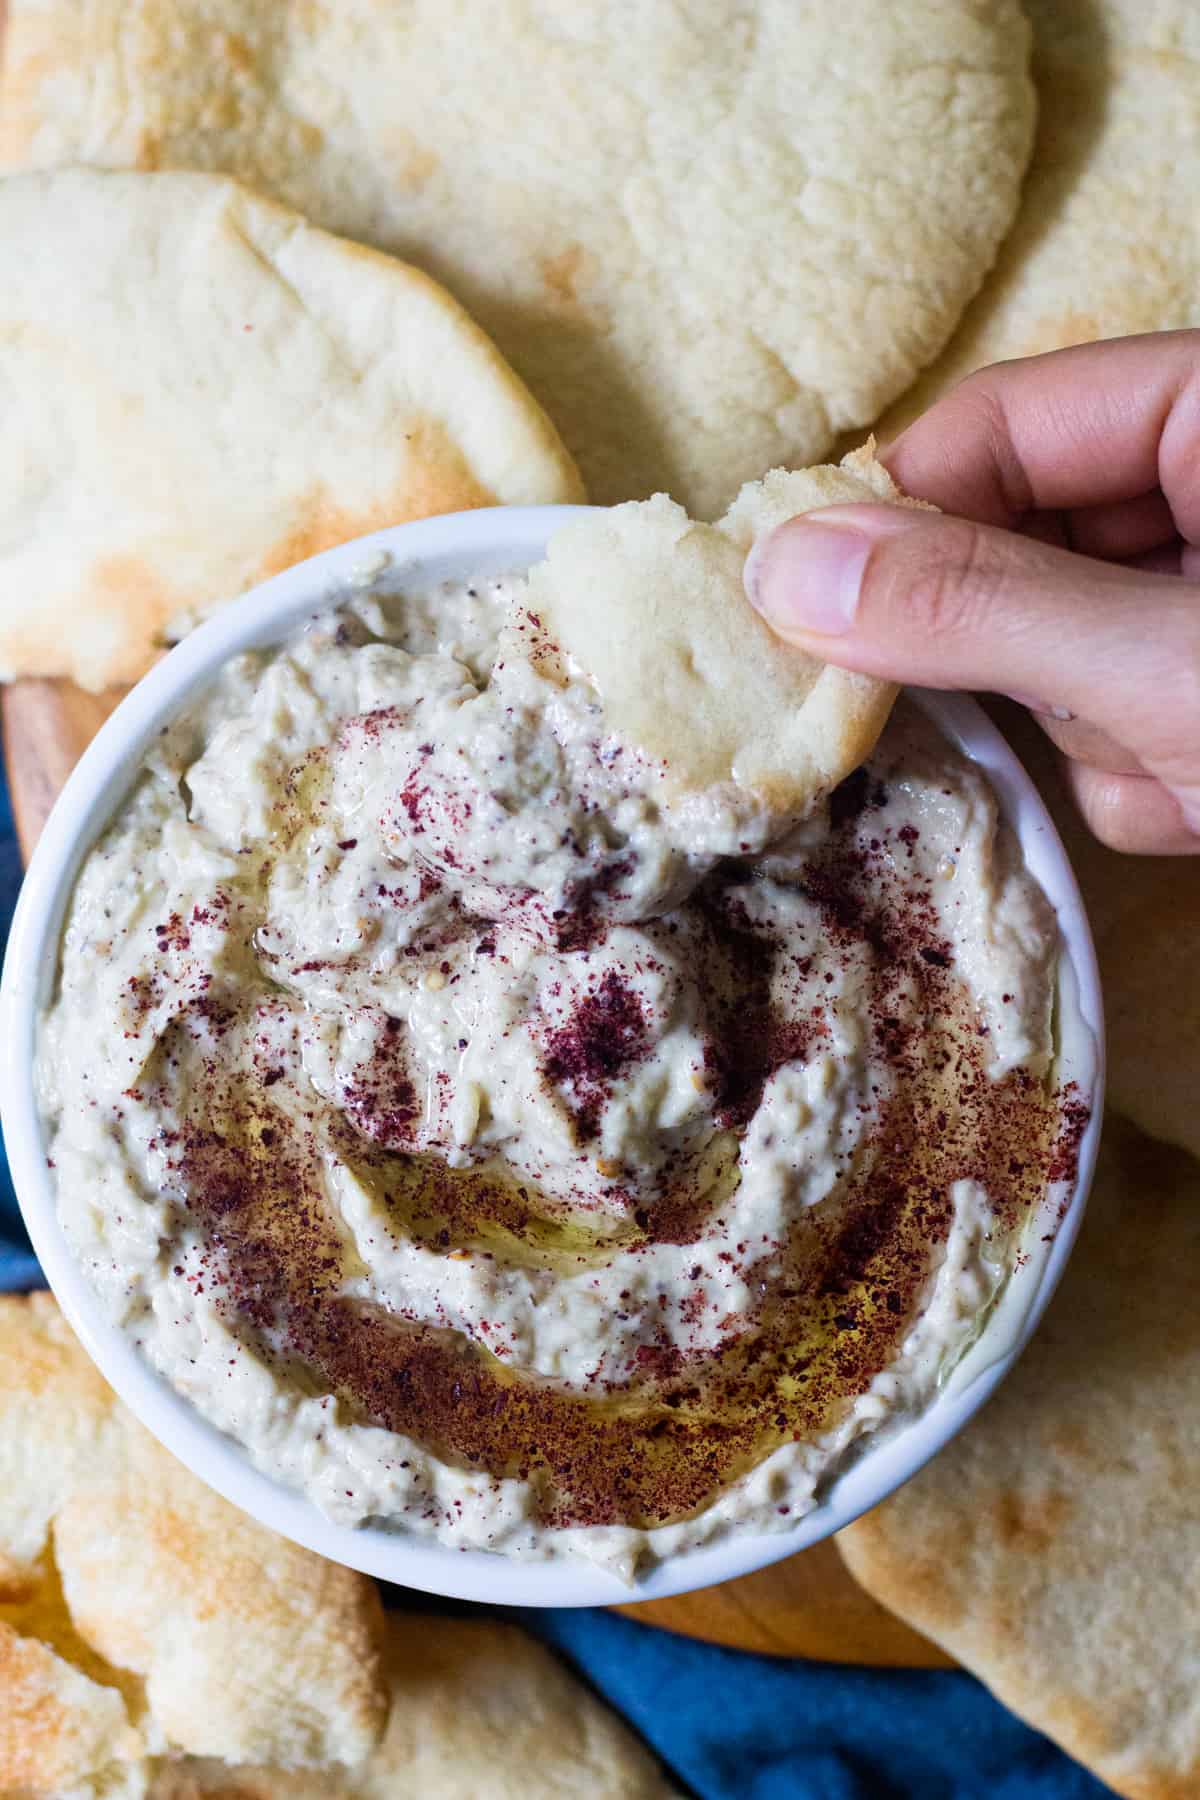 Baba ganoush is a classic middle eastern eggplant recipe. Charred eggplant mixed with tahini makes a delicious dip that you can make in 30 minutes!
